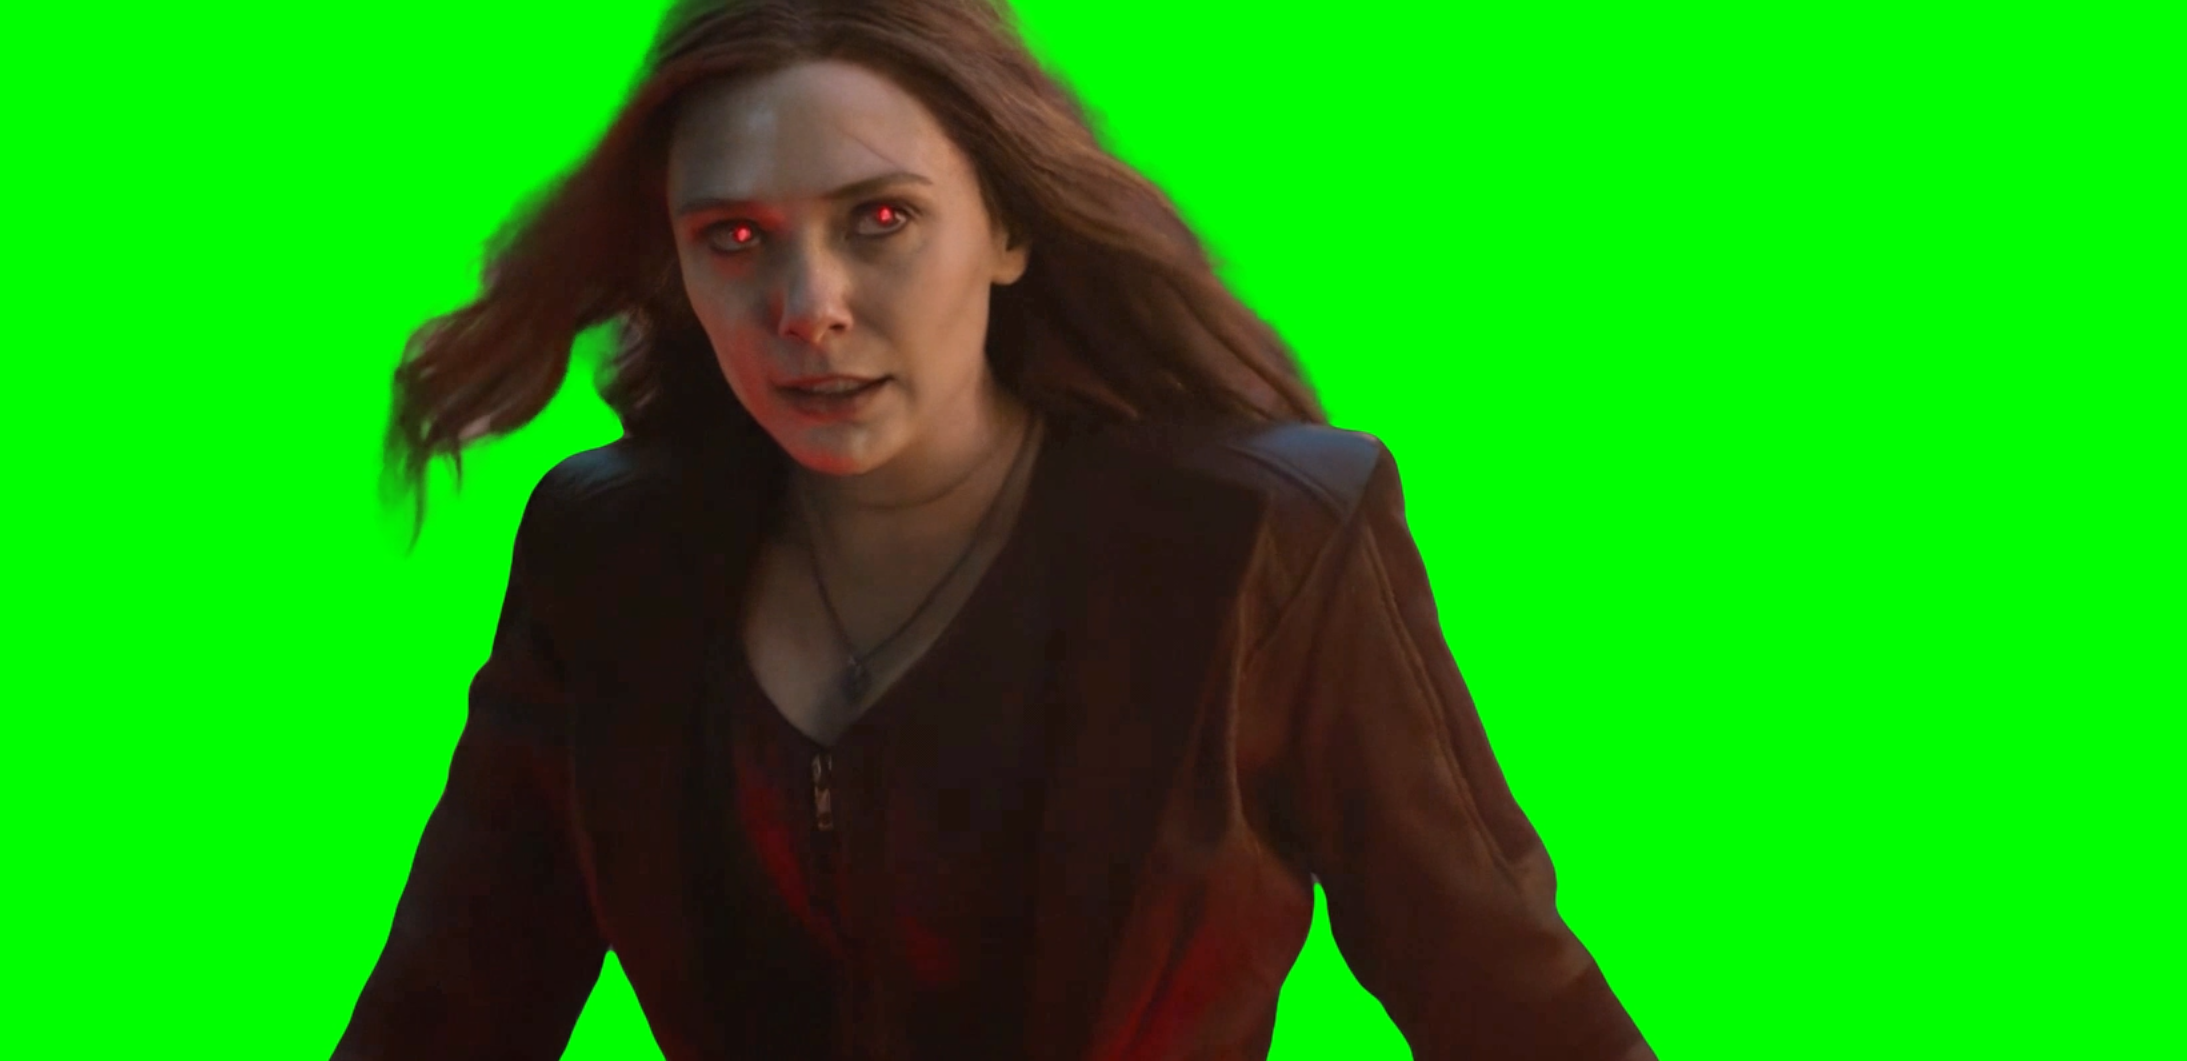 You Took Everything From Me - Scarlet Witch vs Thanos meme (Green Screen)